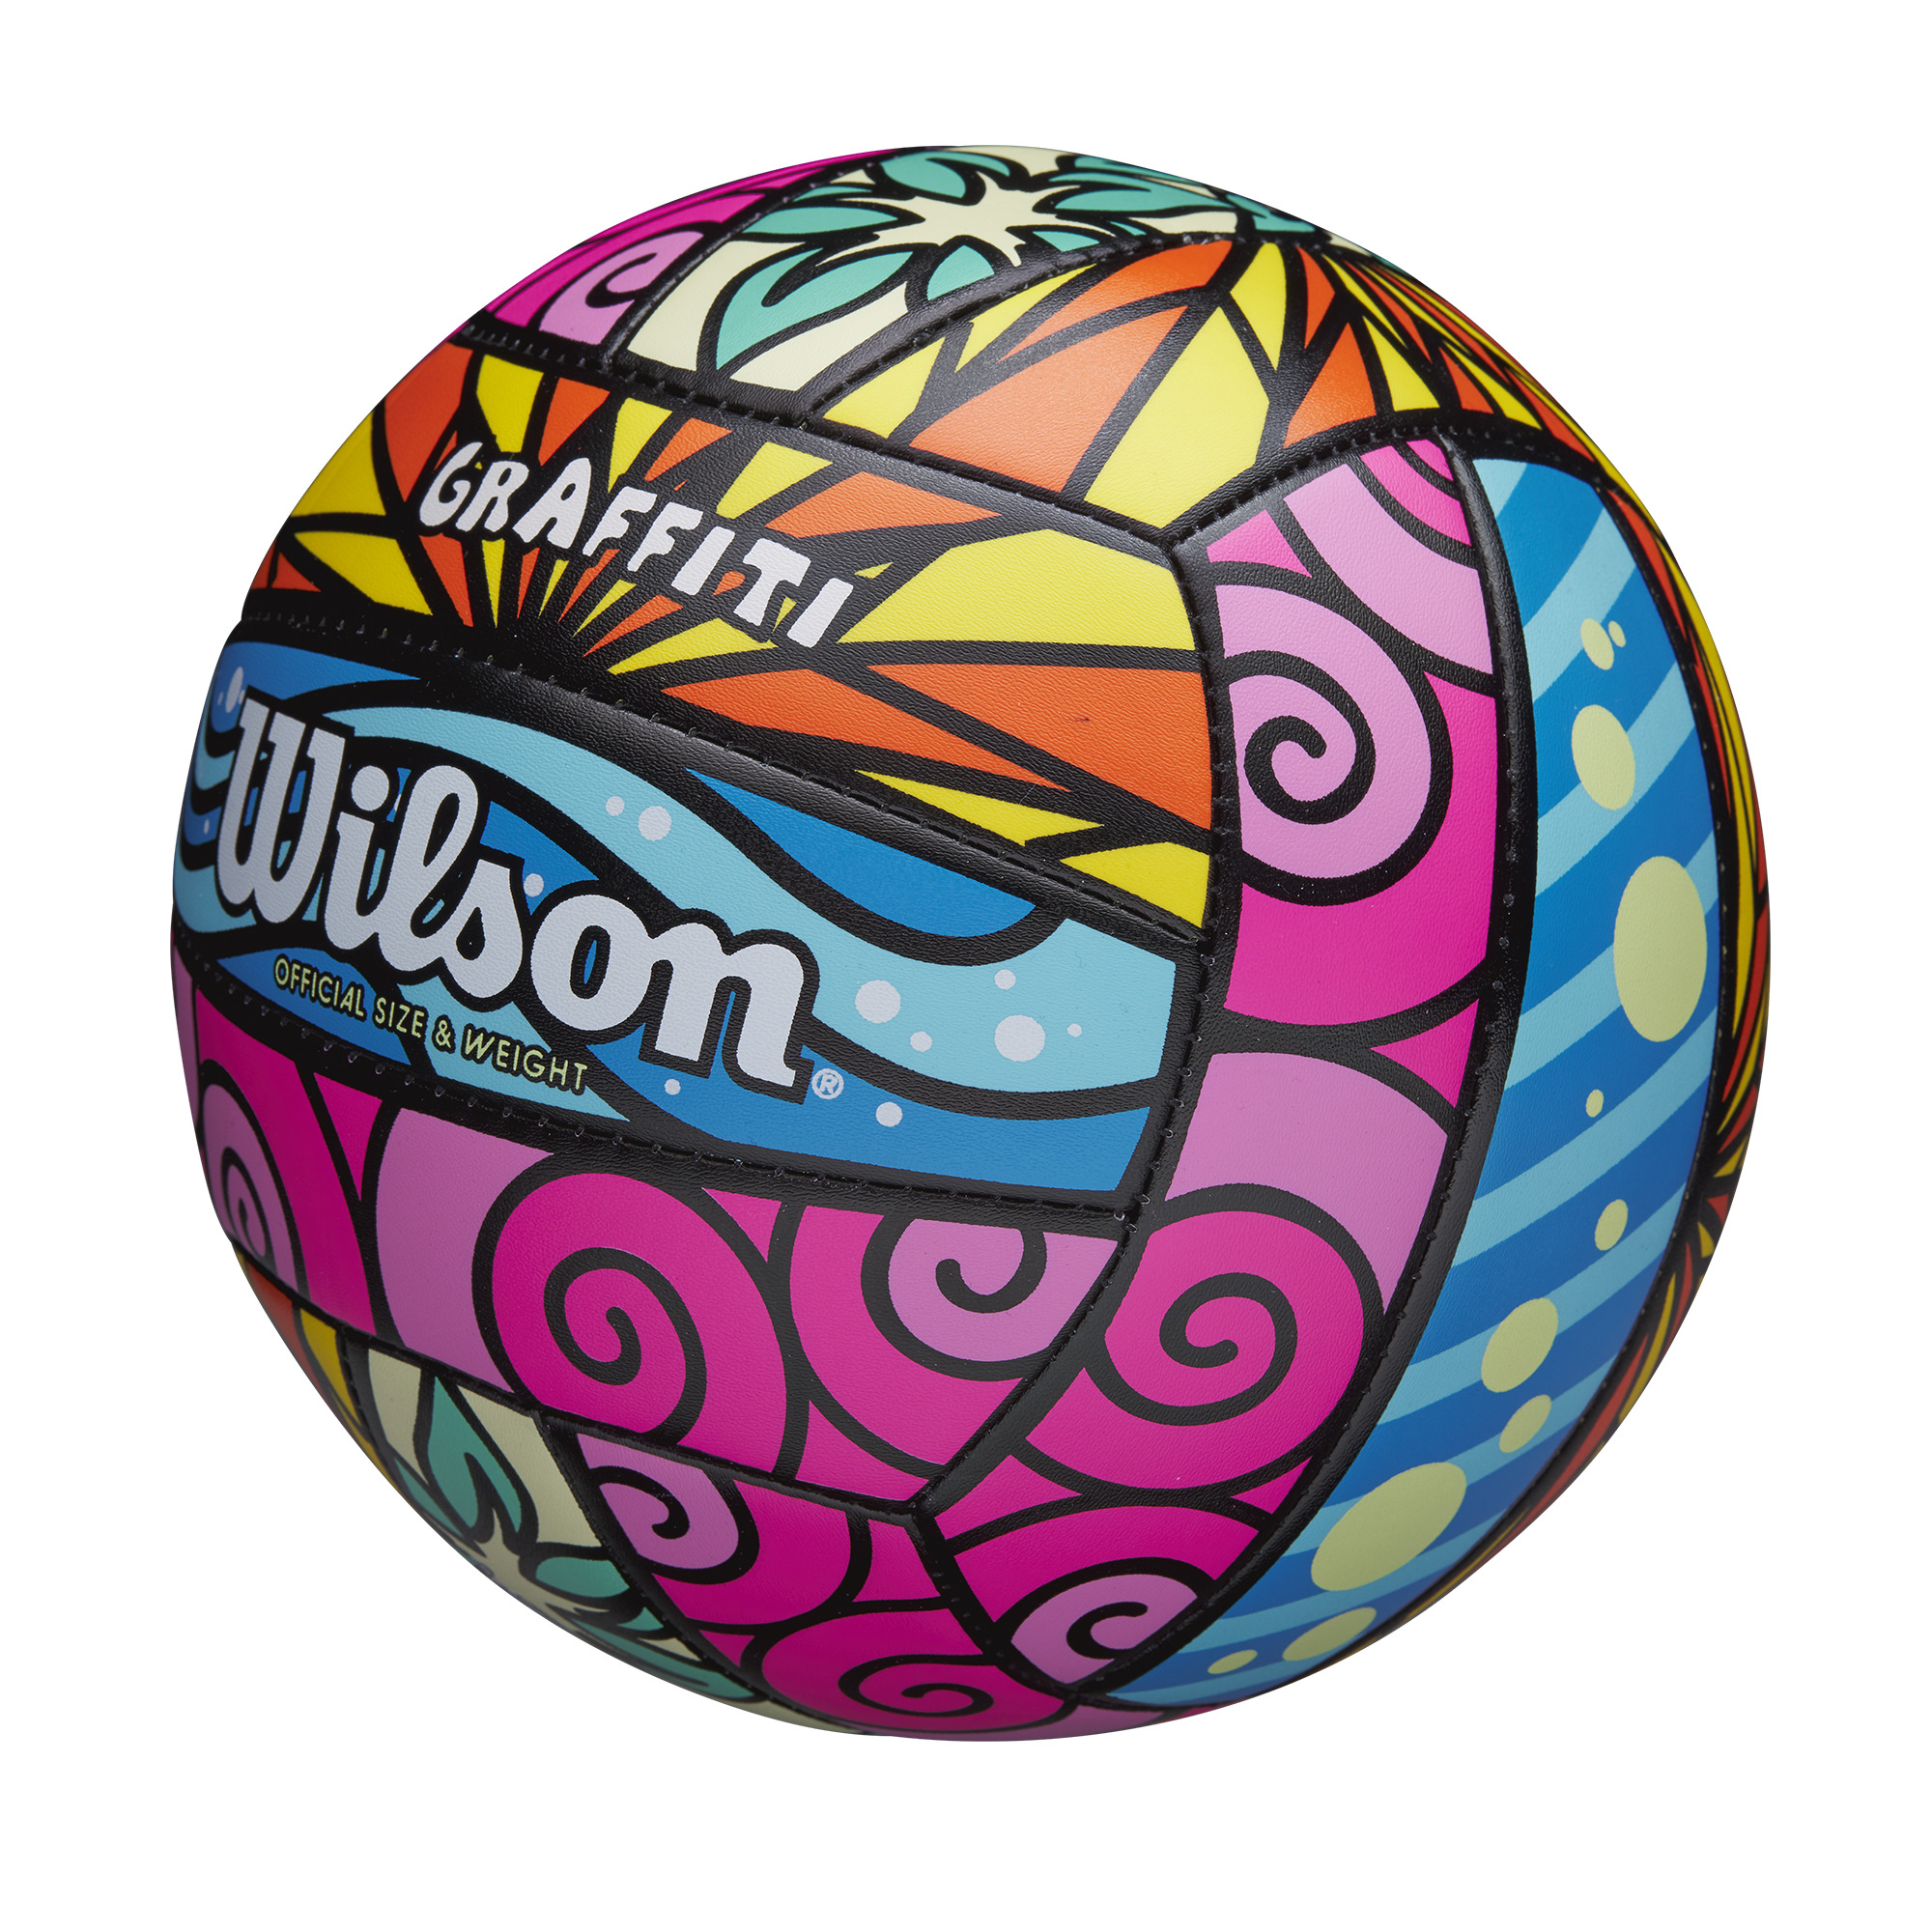 Wilson Graffiti Outdoor Volleyball, Official Size - image 4 of 7